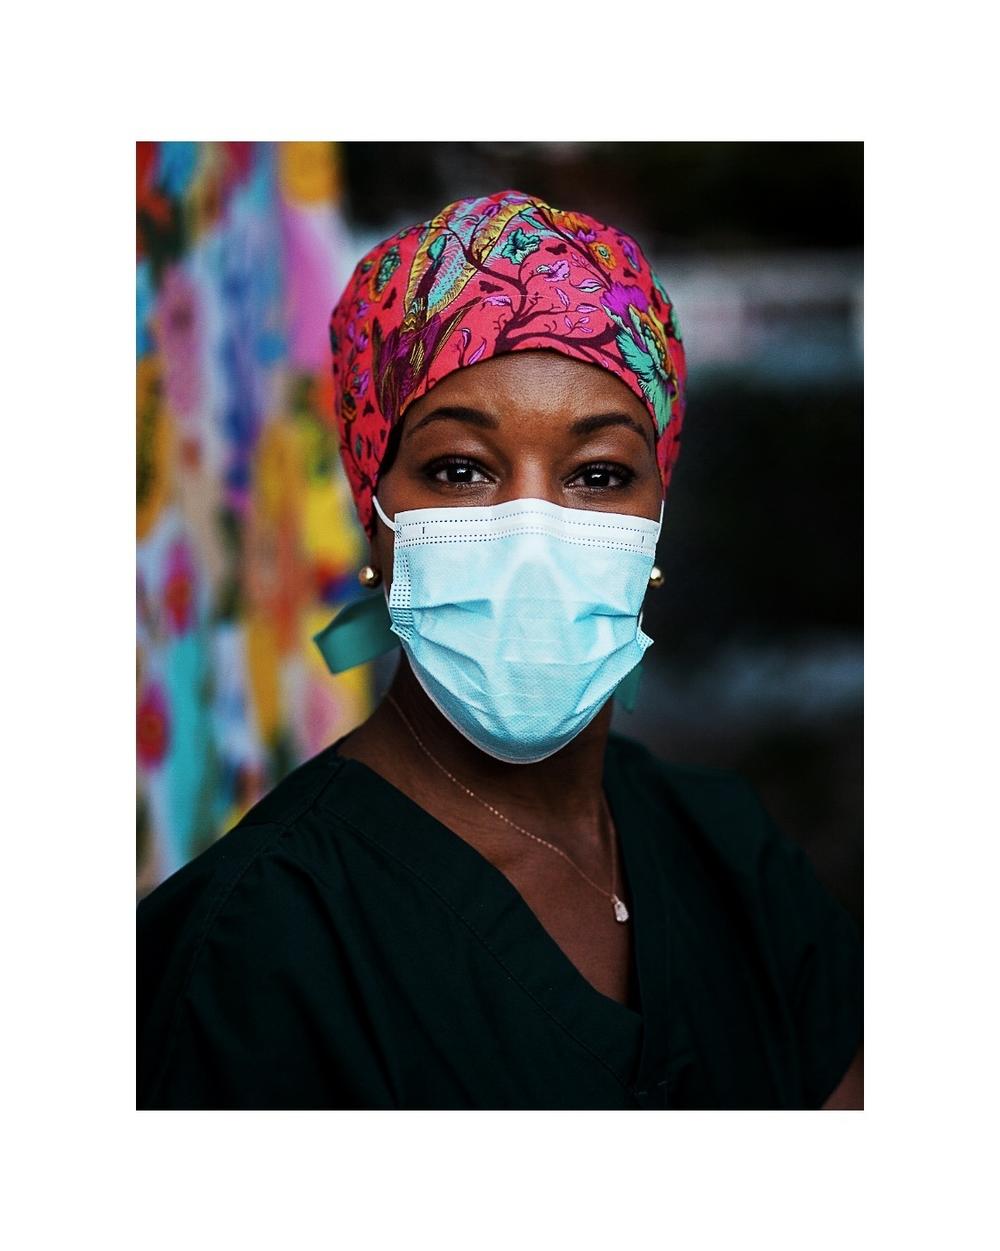 The photo from Karene Jean-Baptiste's project, Faces of Black Women in Health Care, is called Self-Portrait Done During The Pandemic.